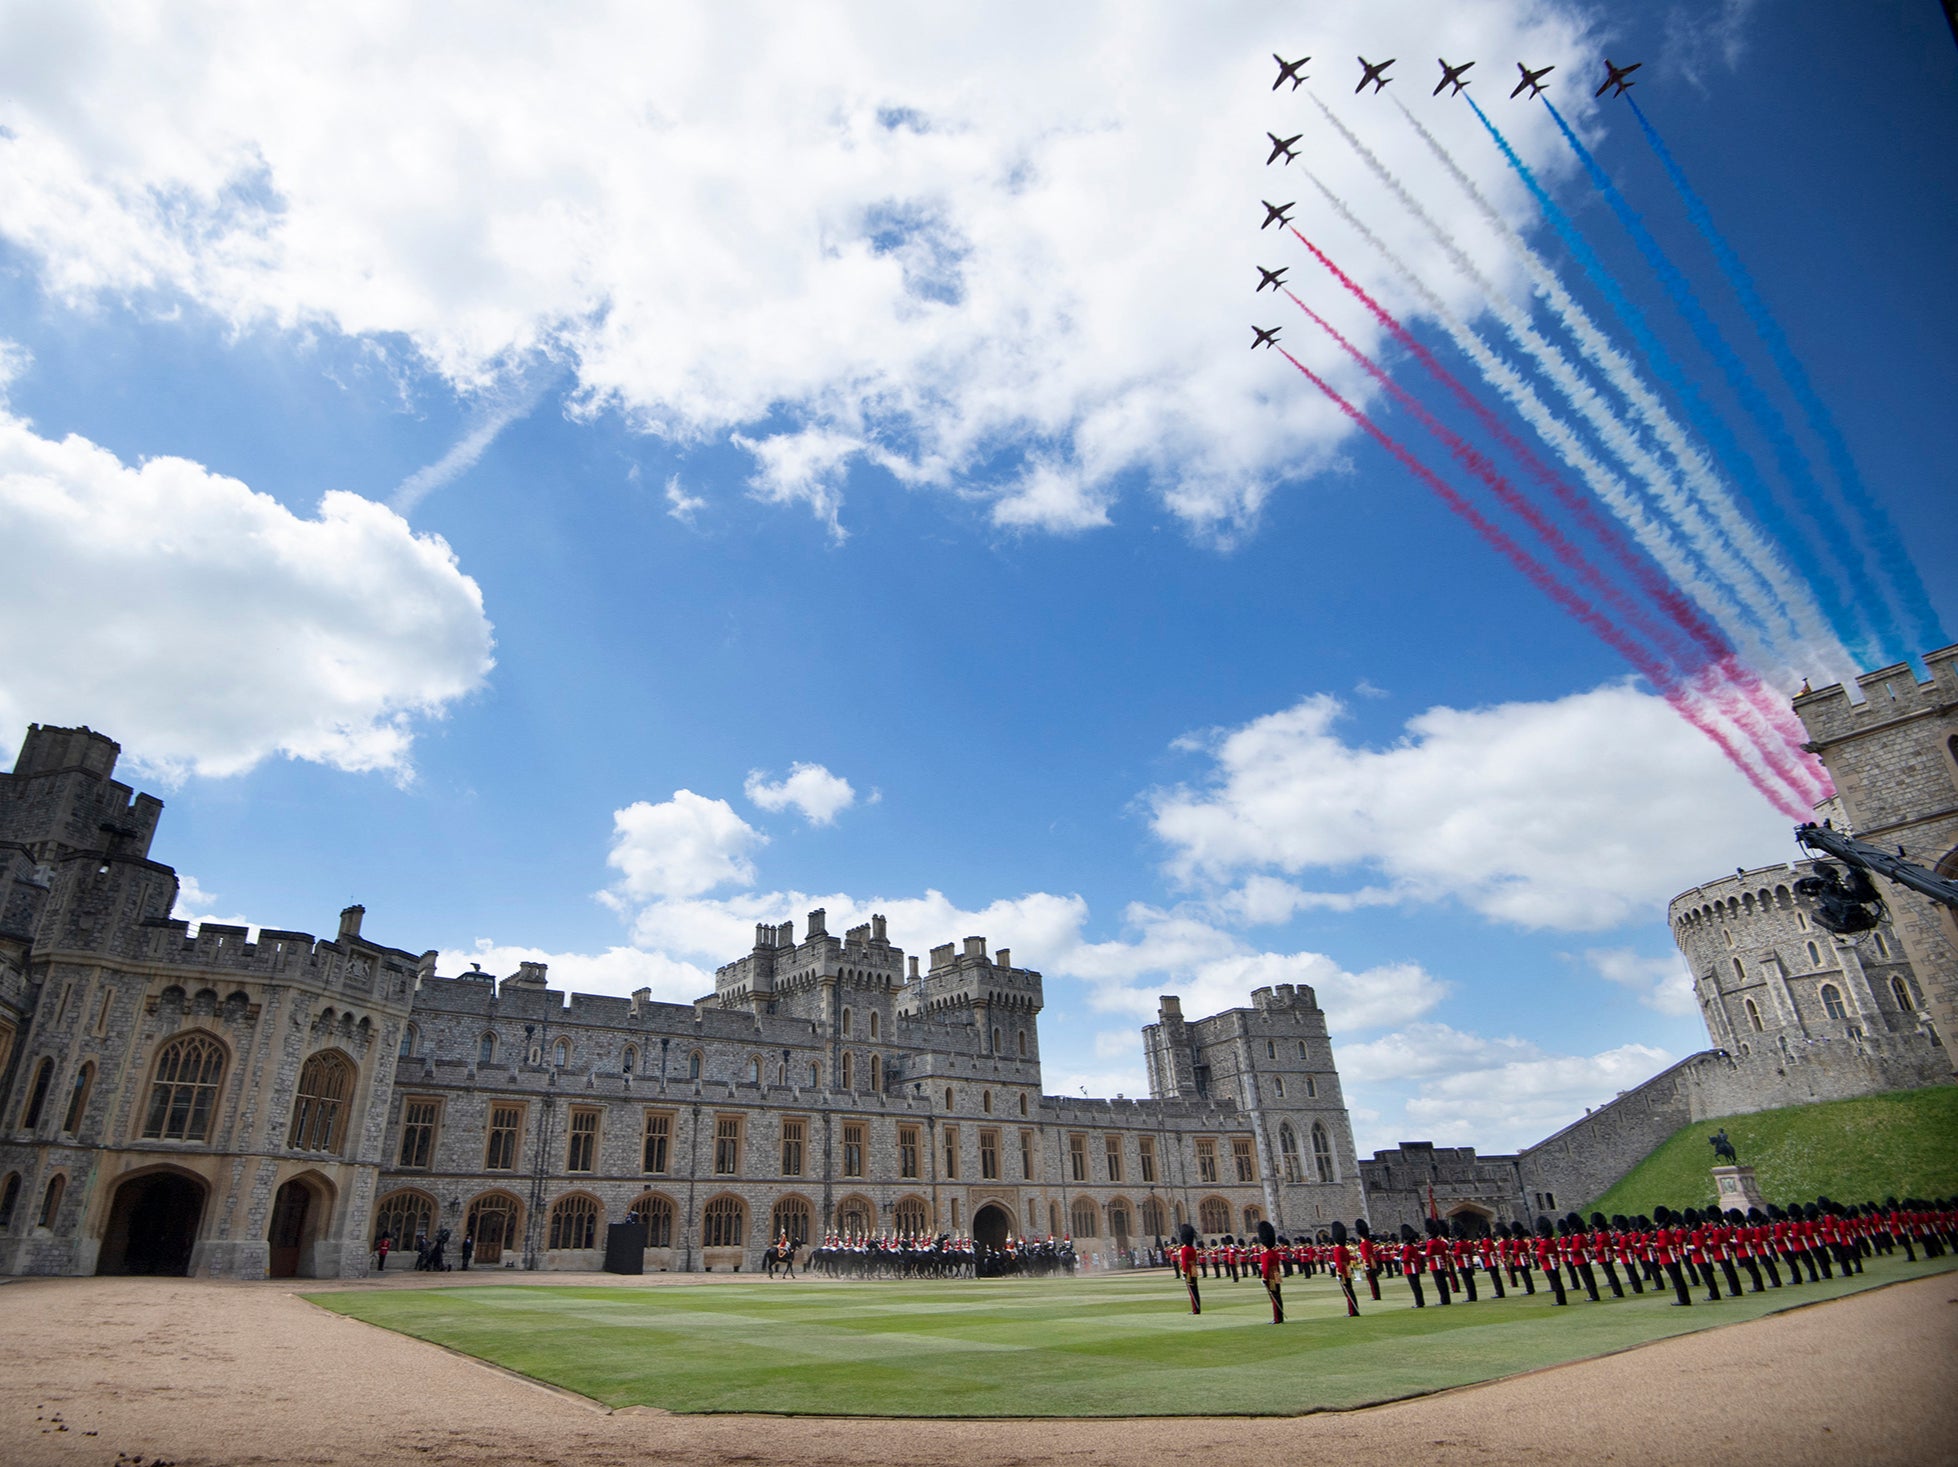 The Red Arrows conduct a flypast as Britain's Queen Elizabeth II watches a military ceremony to mark her official birthday at Windsor Castle on June 12, 2021